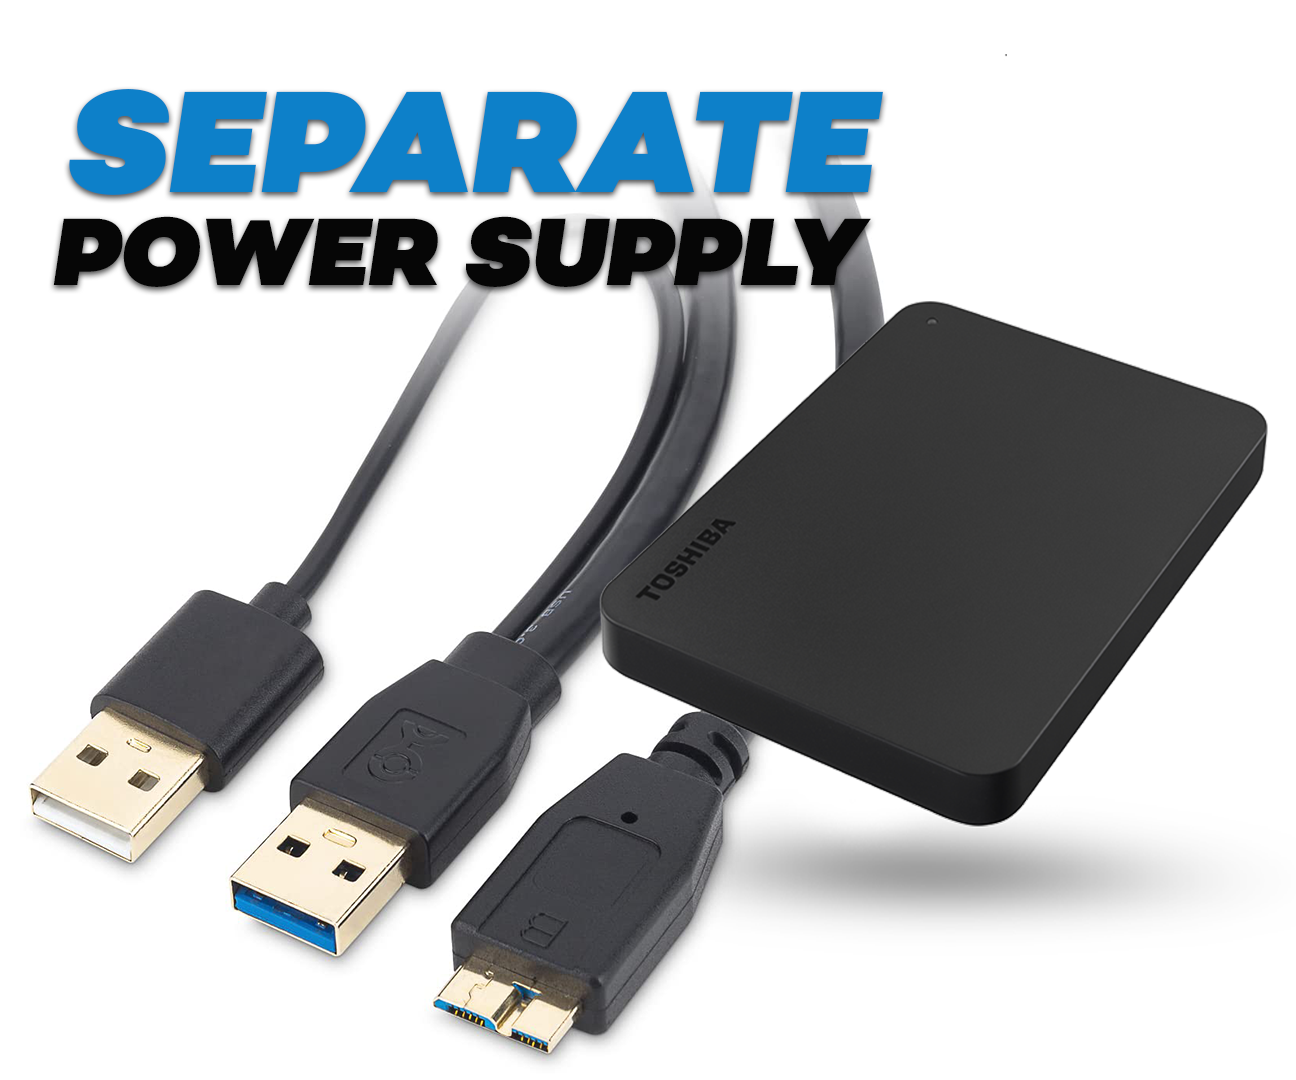 How to Add Separate USB Power Supply to an External Hard Drive